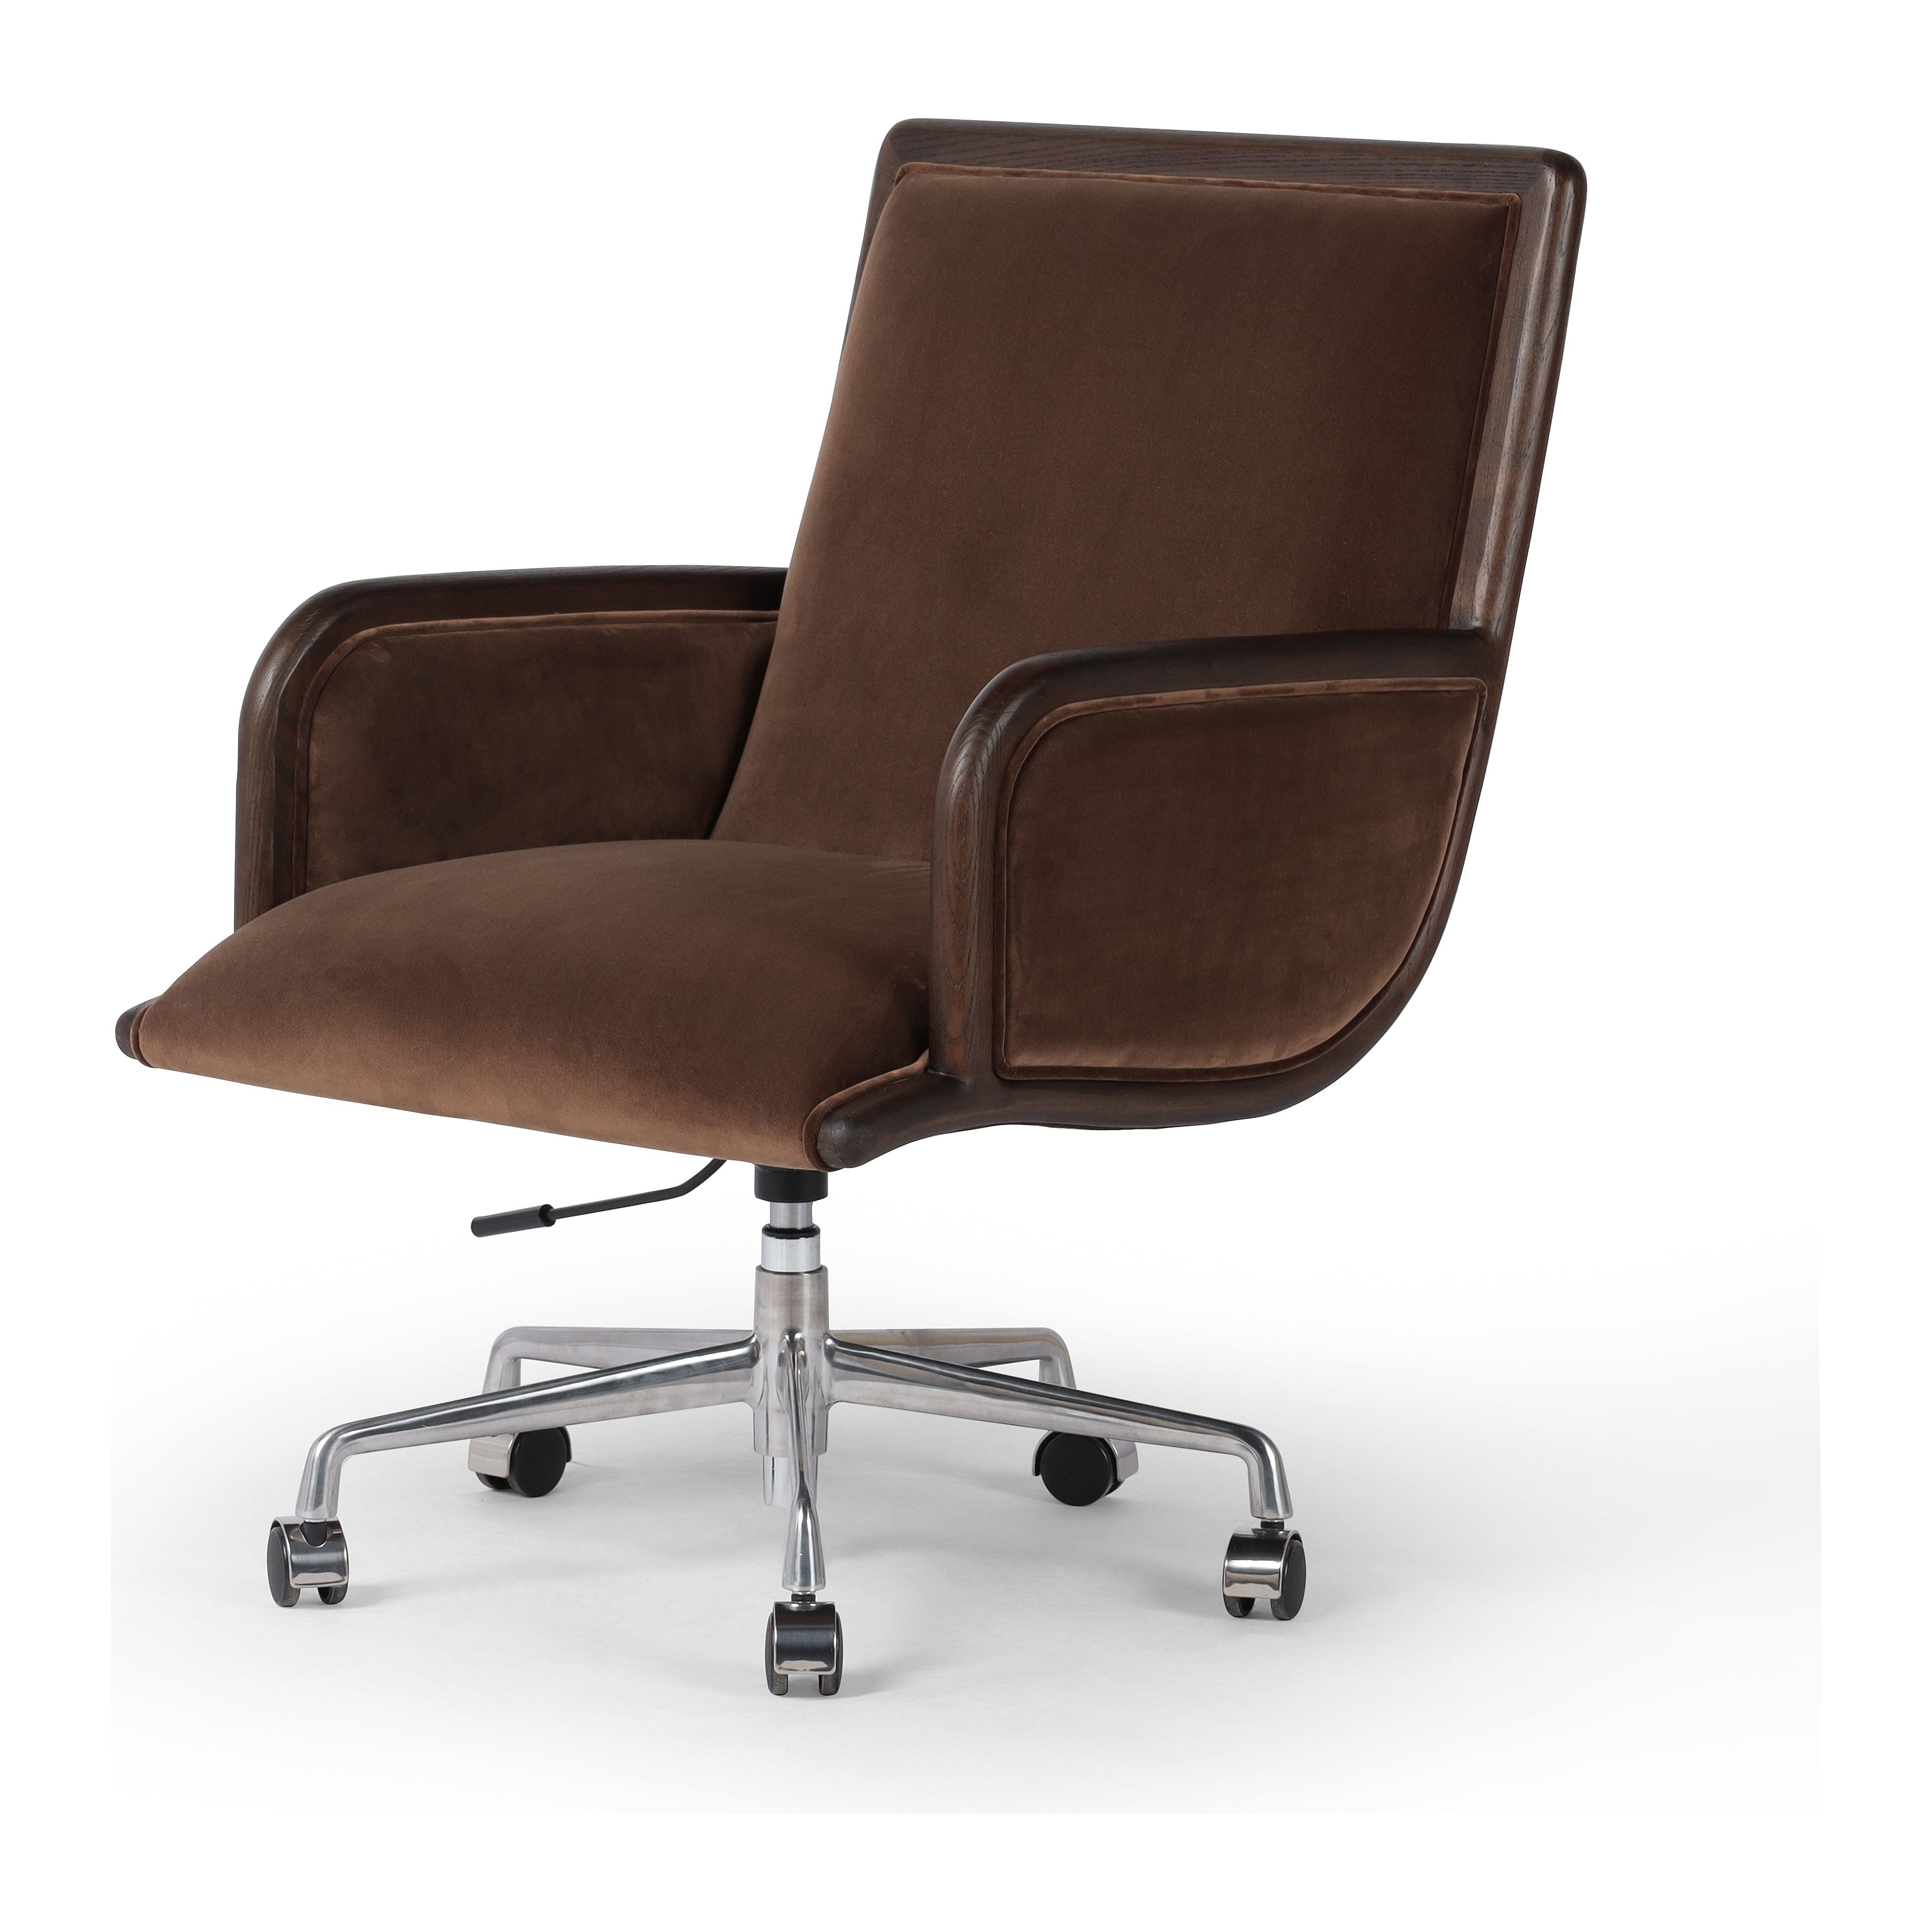 This comfort-driven take on the modern desk chair features velvety cocoa-colored upholstery, pared with a wooden frame. Casters and seat height adjustability for ease as you work. Amethyst Home provides interior design, new construction, custom furniture, and area rugs in the Houston metro area.